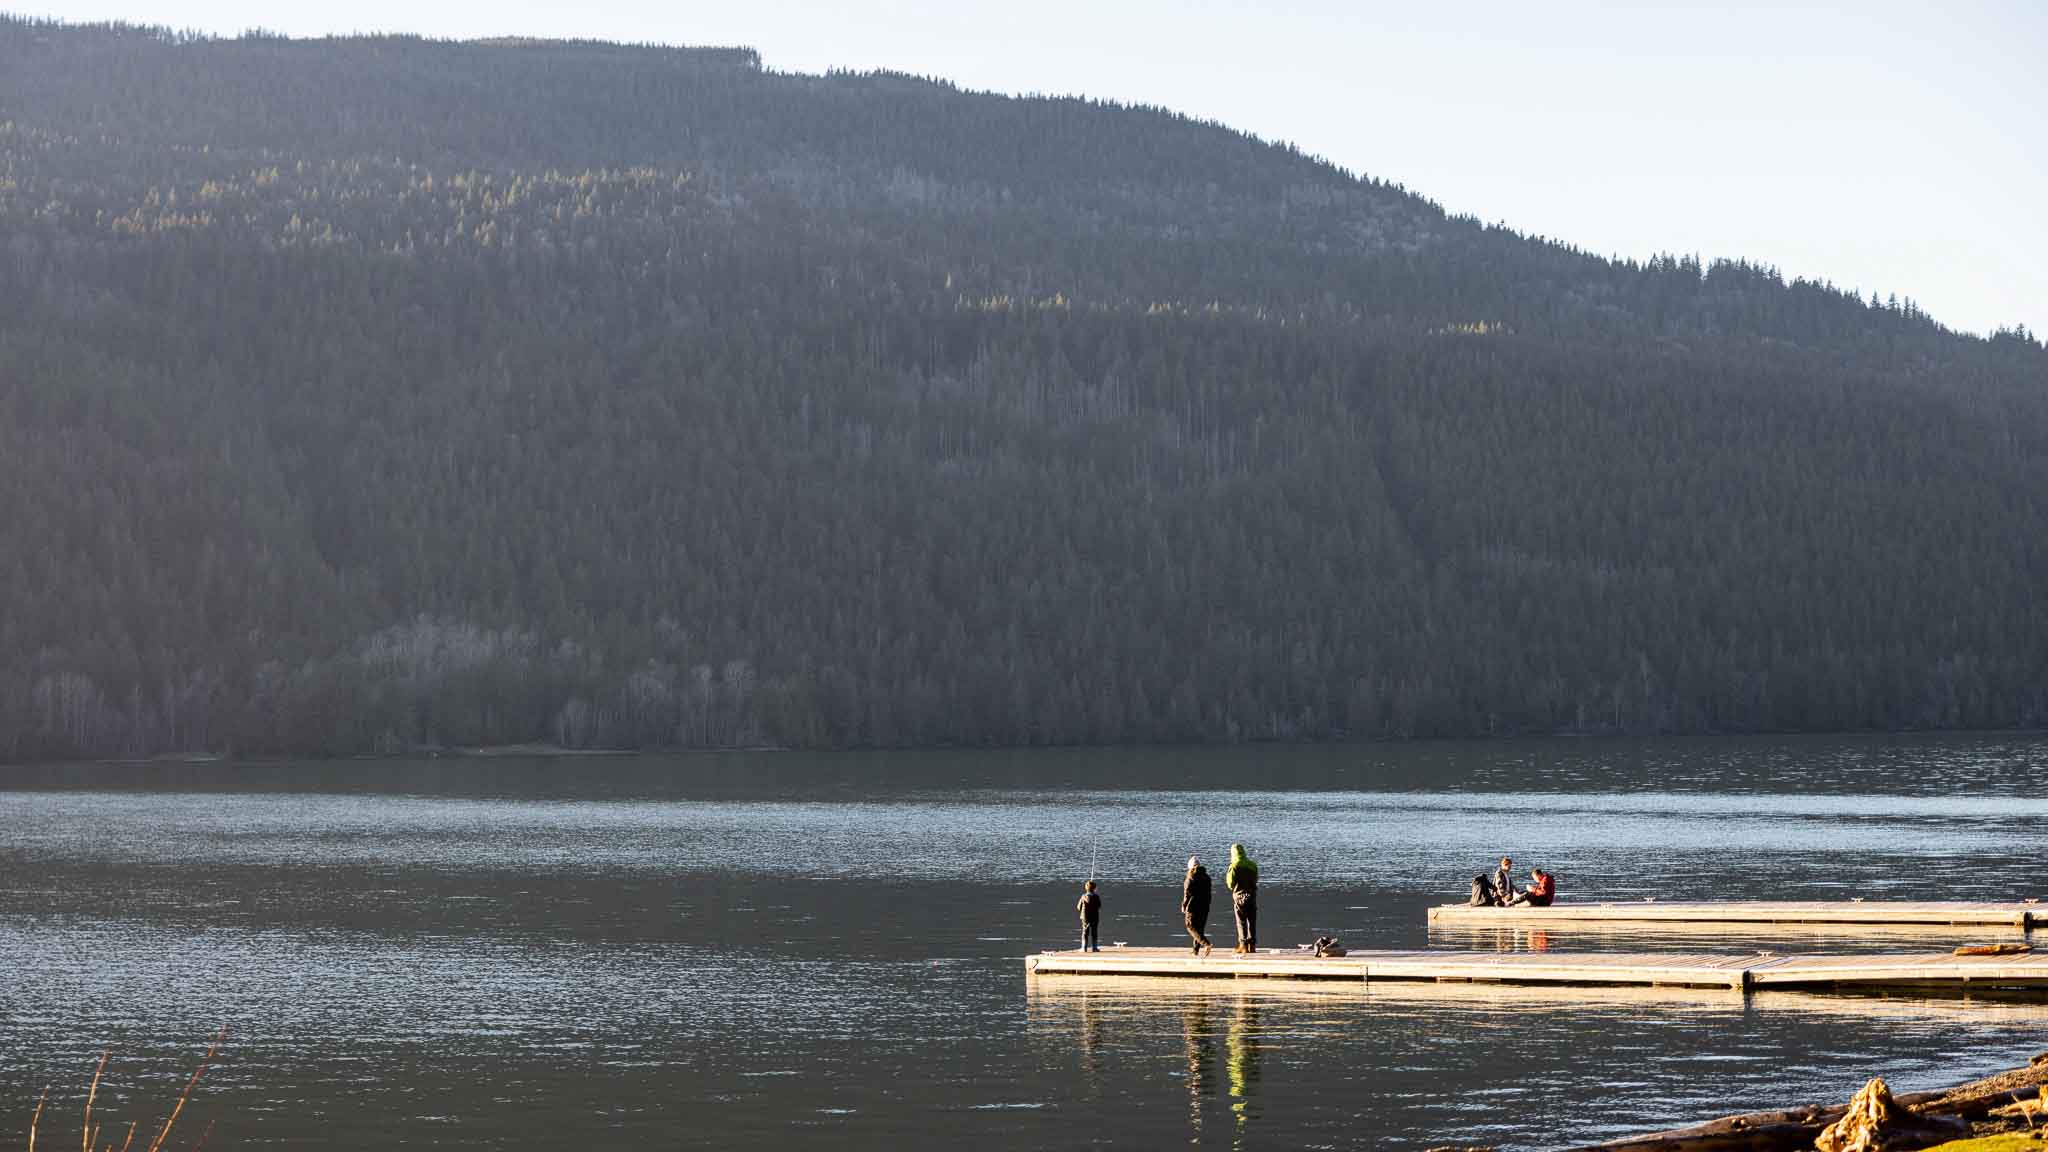 A sunny view around where the water quality testing was happening in Chilliwack. A mountain rises in the background, while in the foreground people stand and sit on two wooden docks which extend into the water - on one, three people are fishing with rods.